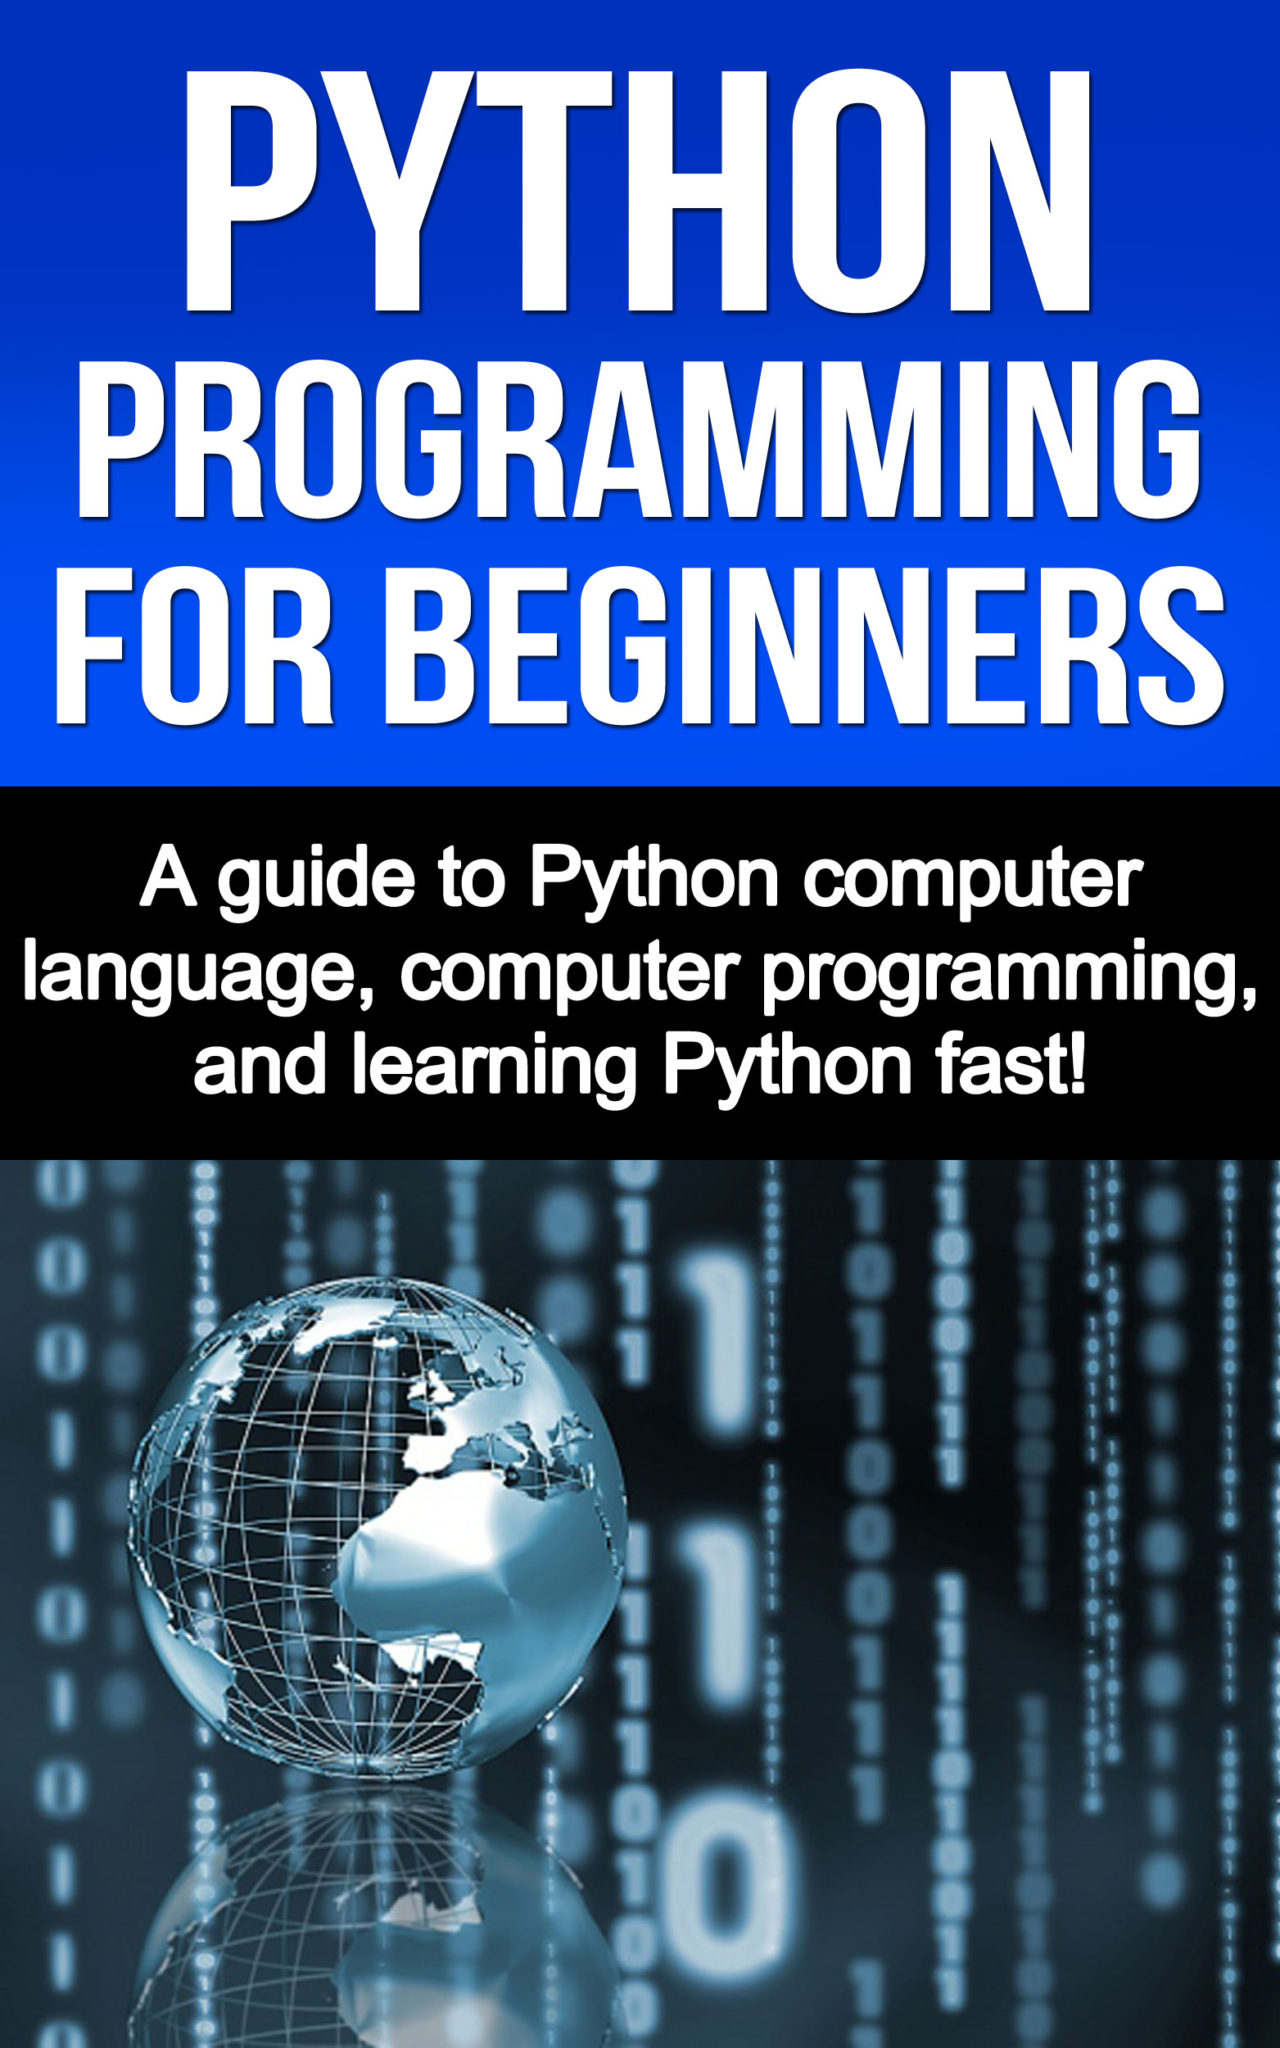 FREE: Python Programming for Beginners: A guide to Python computer language, computer programming, and learning Python fast! by Joe Benton